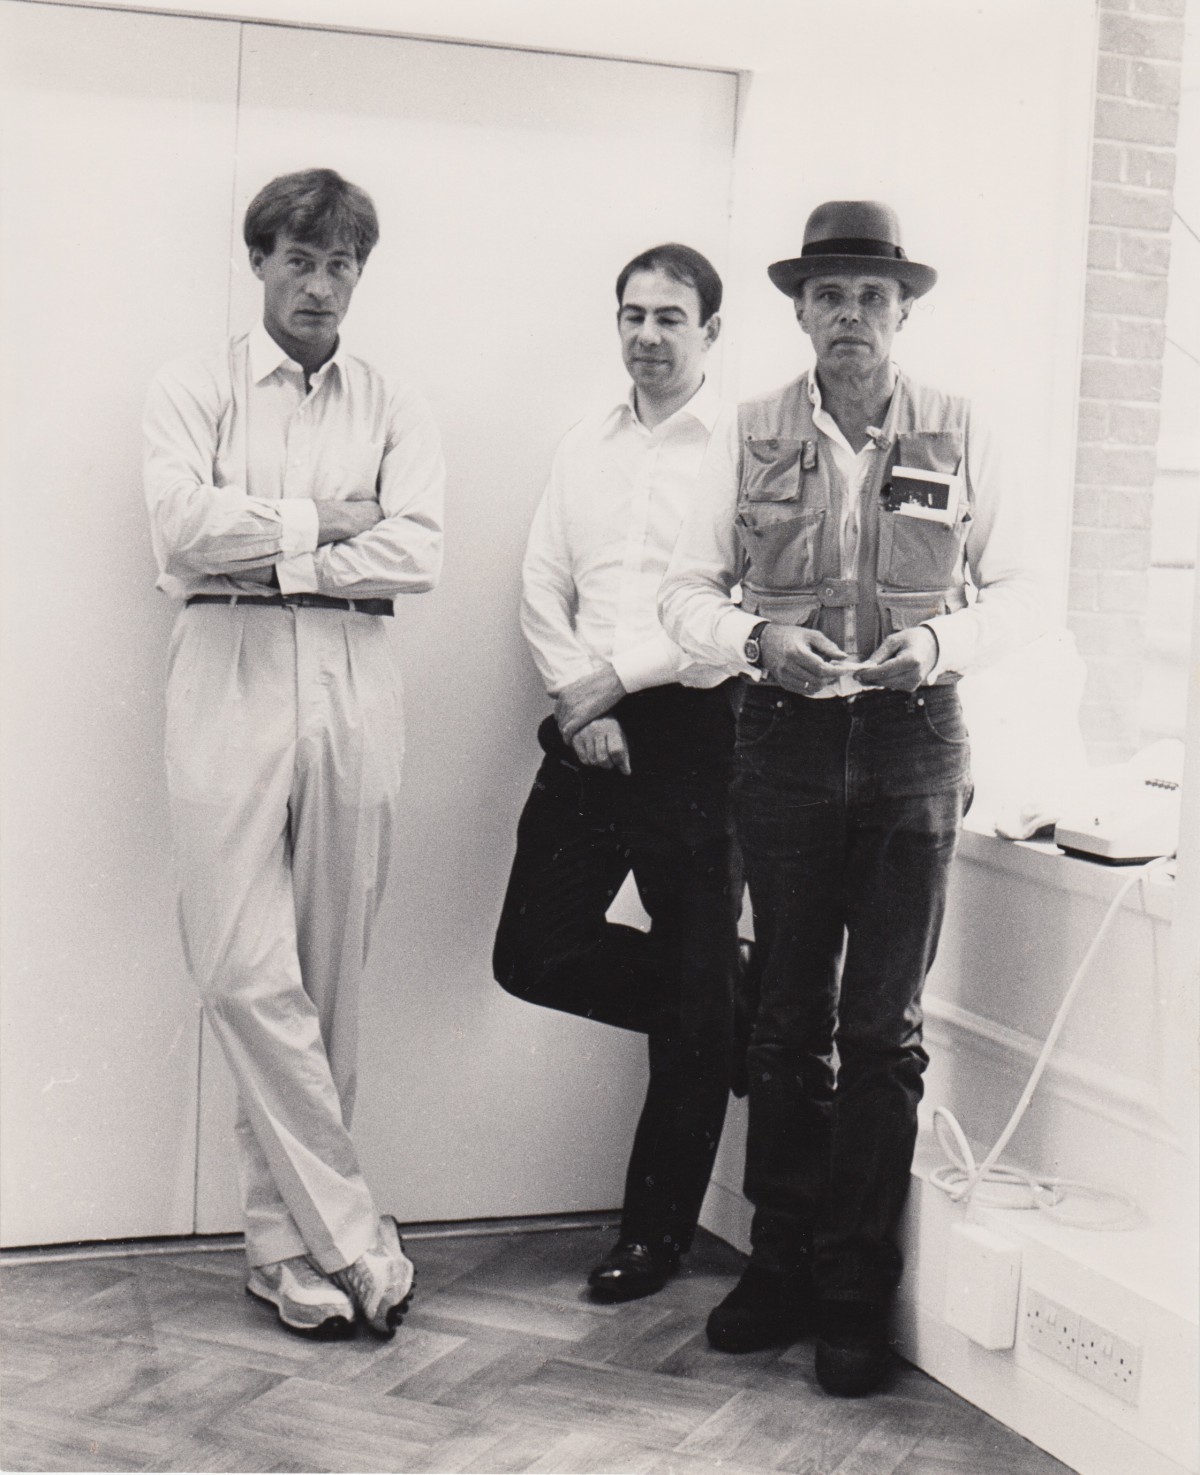 WITH HEINER BASTIAN AND JOSEPH BEUYS